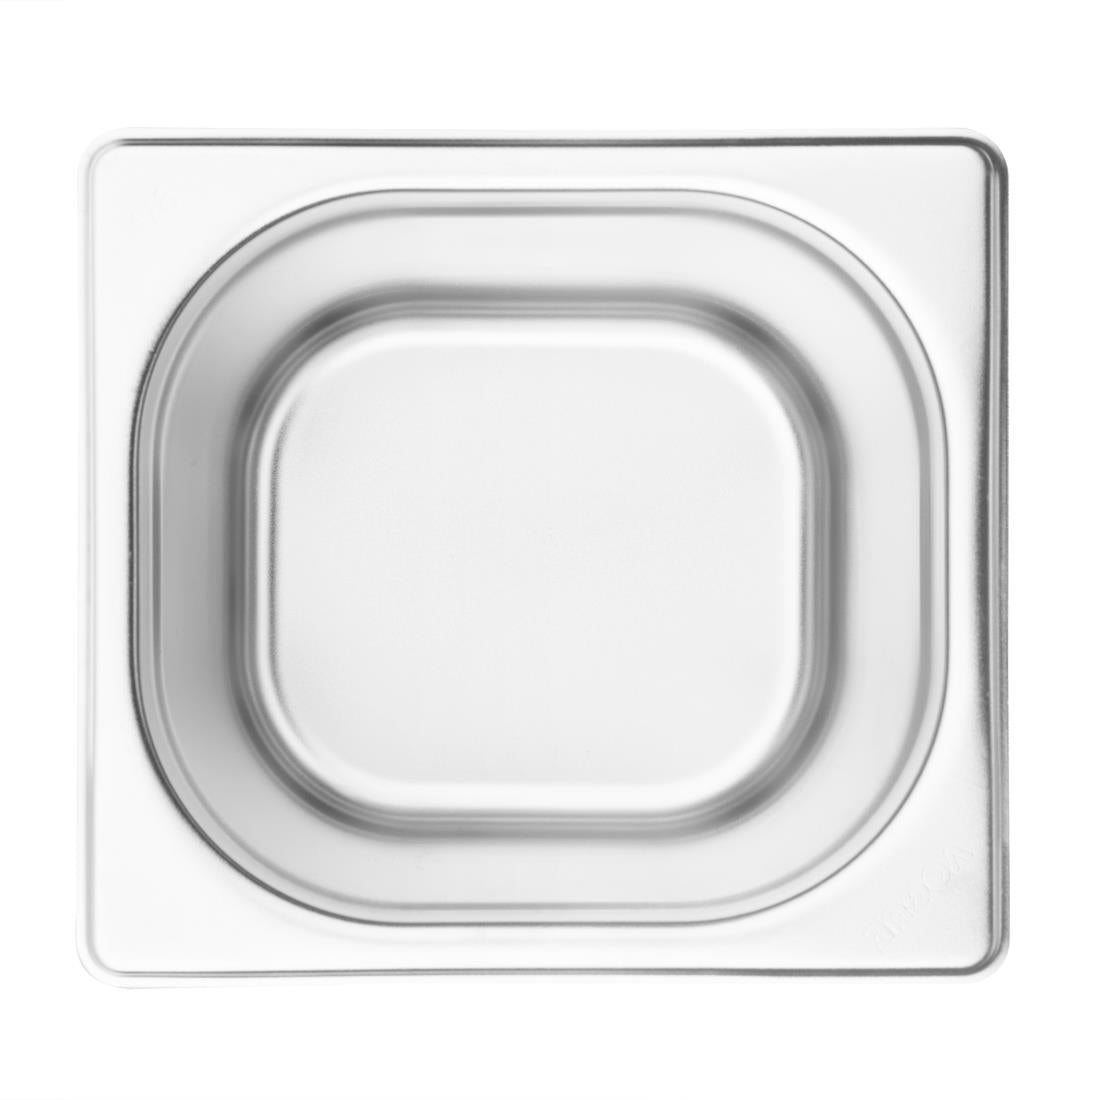 Vogue Stainless Steel 1/6 Gastronorm Pan 200mm